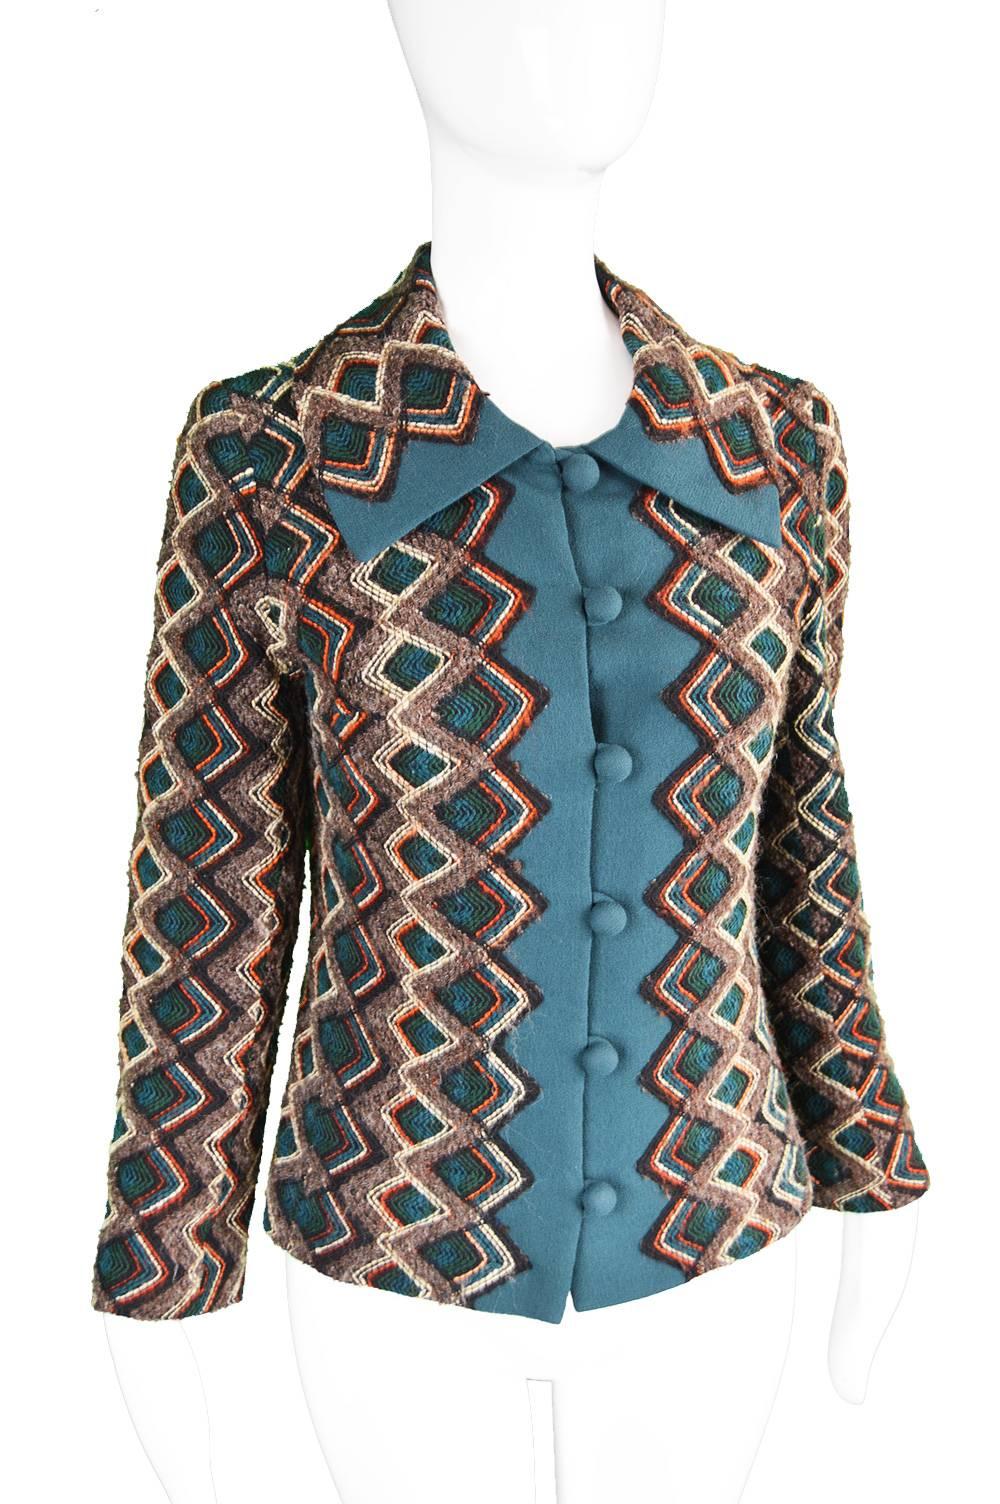 Norman Hartnell Woven Wool & Crepe Jacket, 1960s For Sale 2